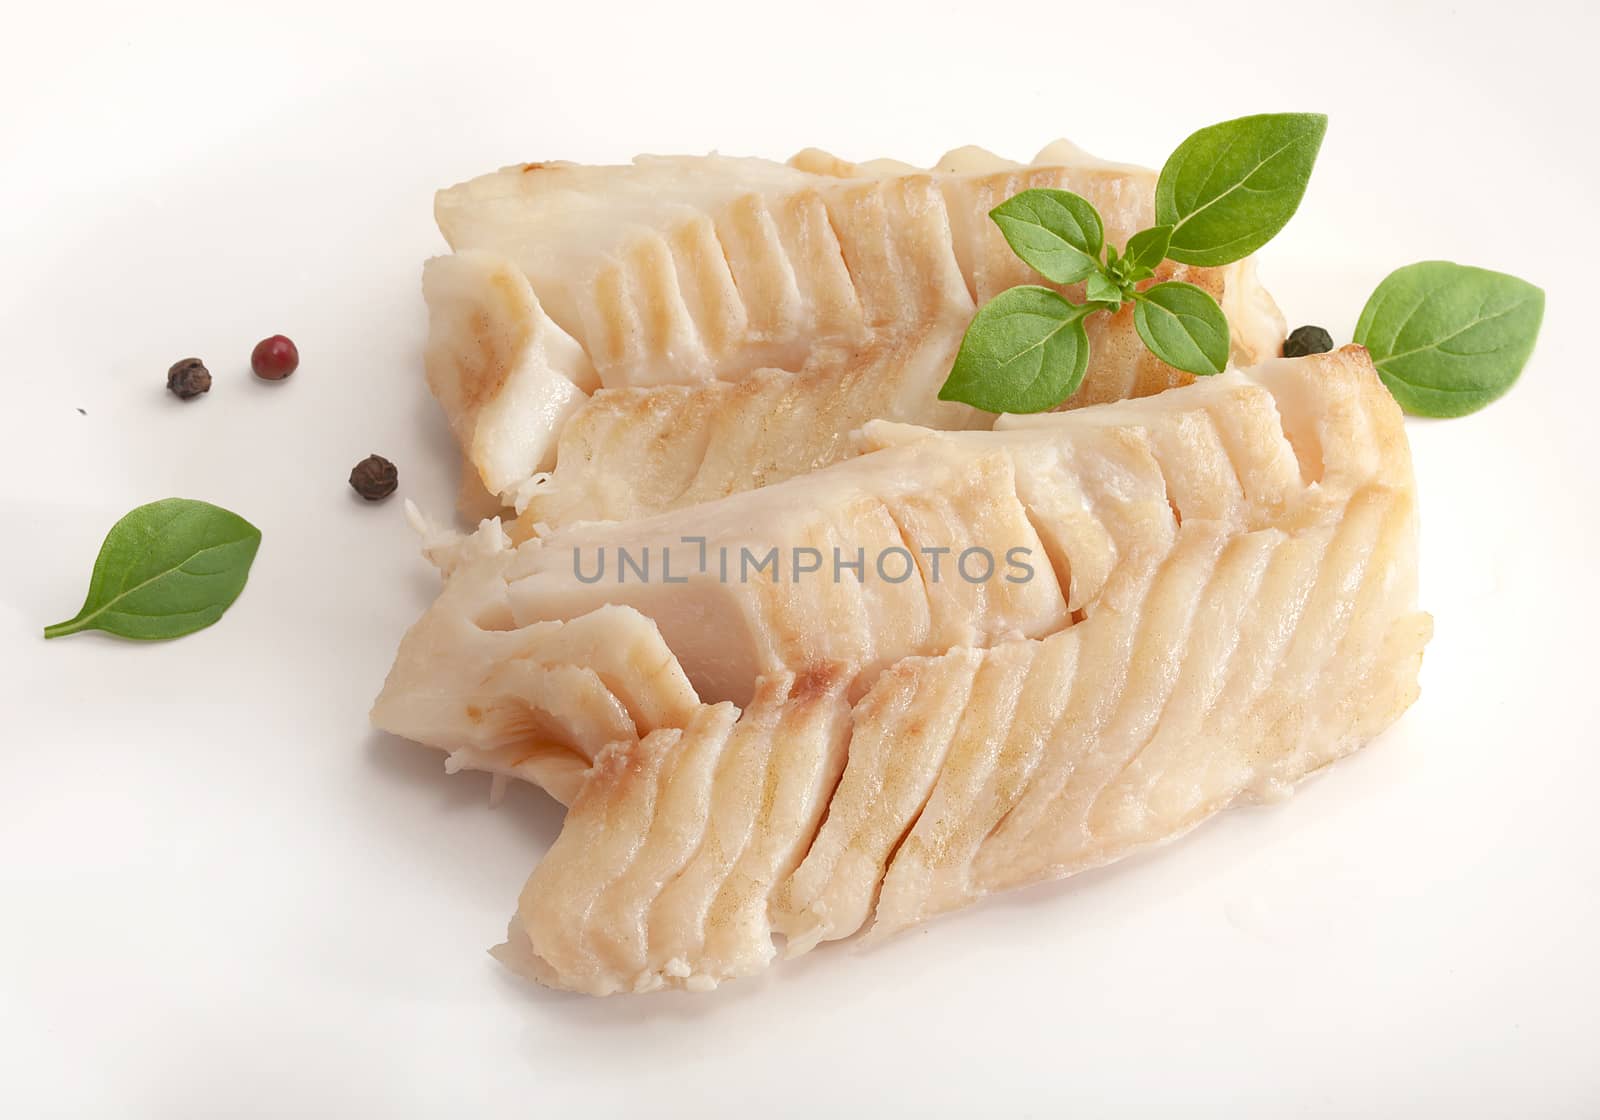 Two baked cod loin pieces with fresh green basil